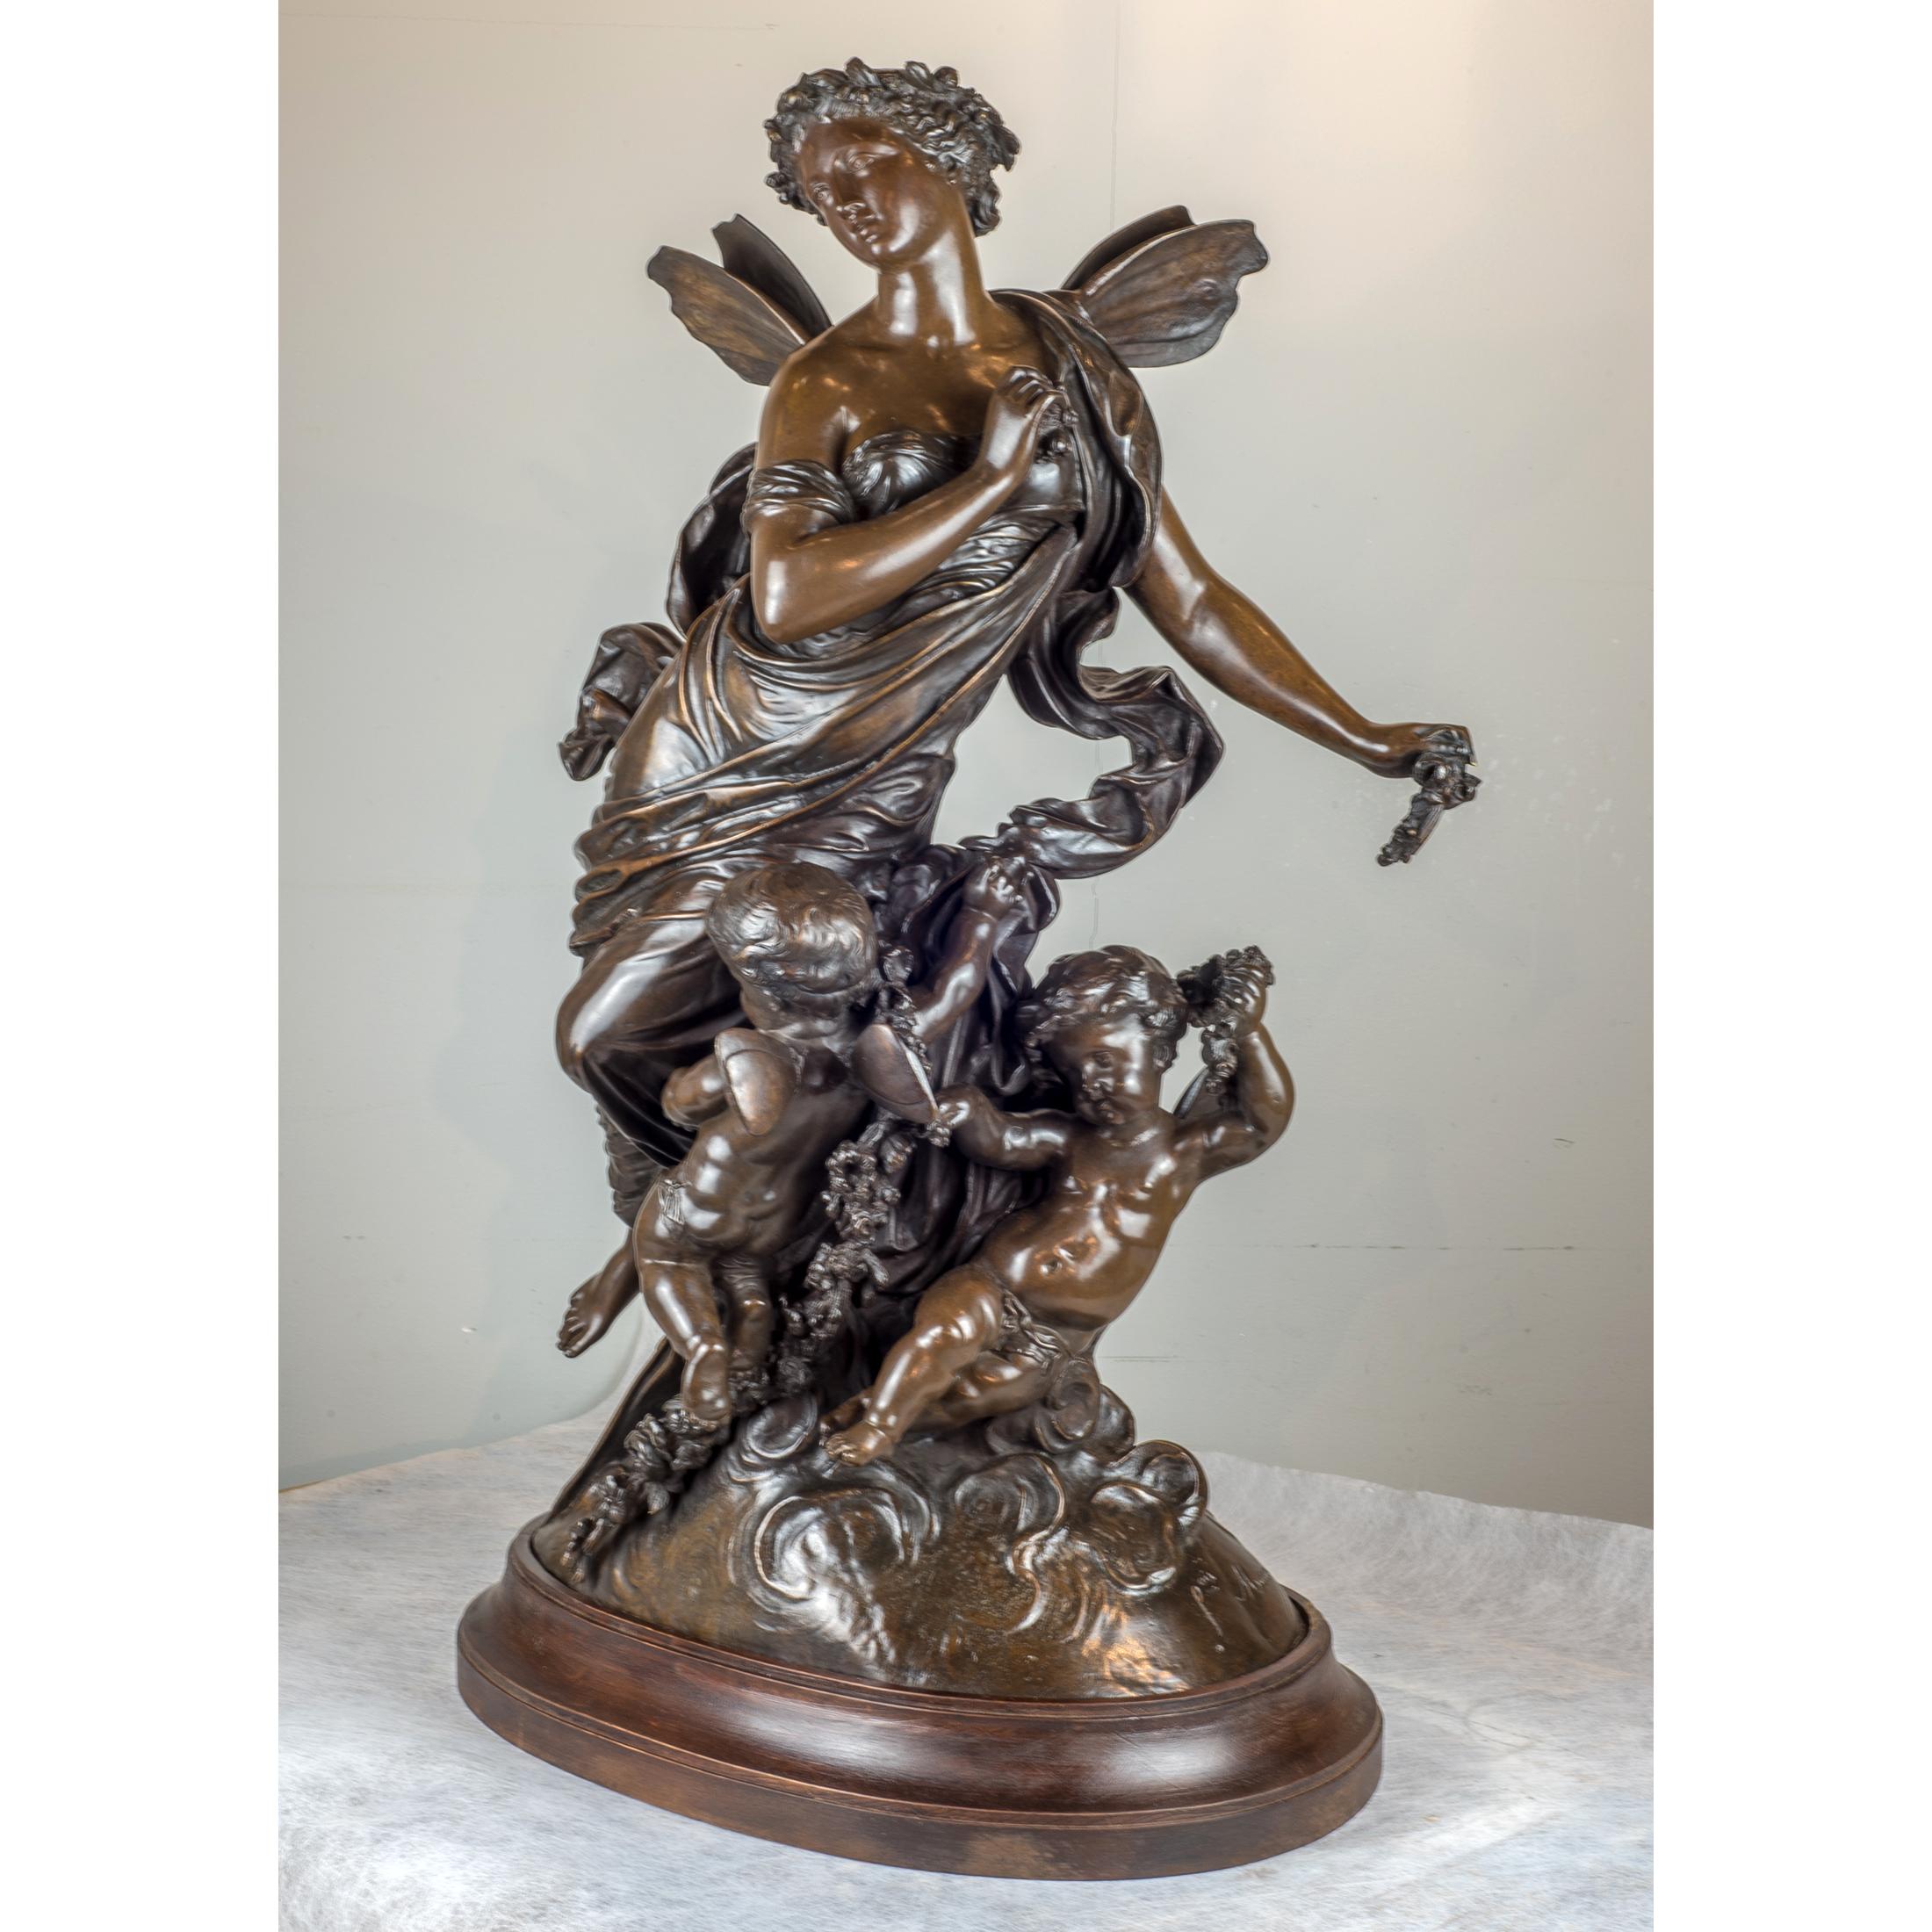 Fine quality figural patinated bronze group of angel and cherub forms on oval base. Signed 'Moreau'

Artist: Mathurin Moreau (1822-1912) 
Origin: French
Dimension: 31 1/2 in. x 20 in.
 